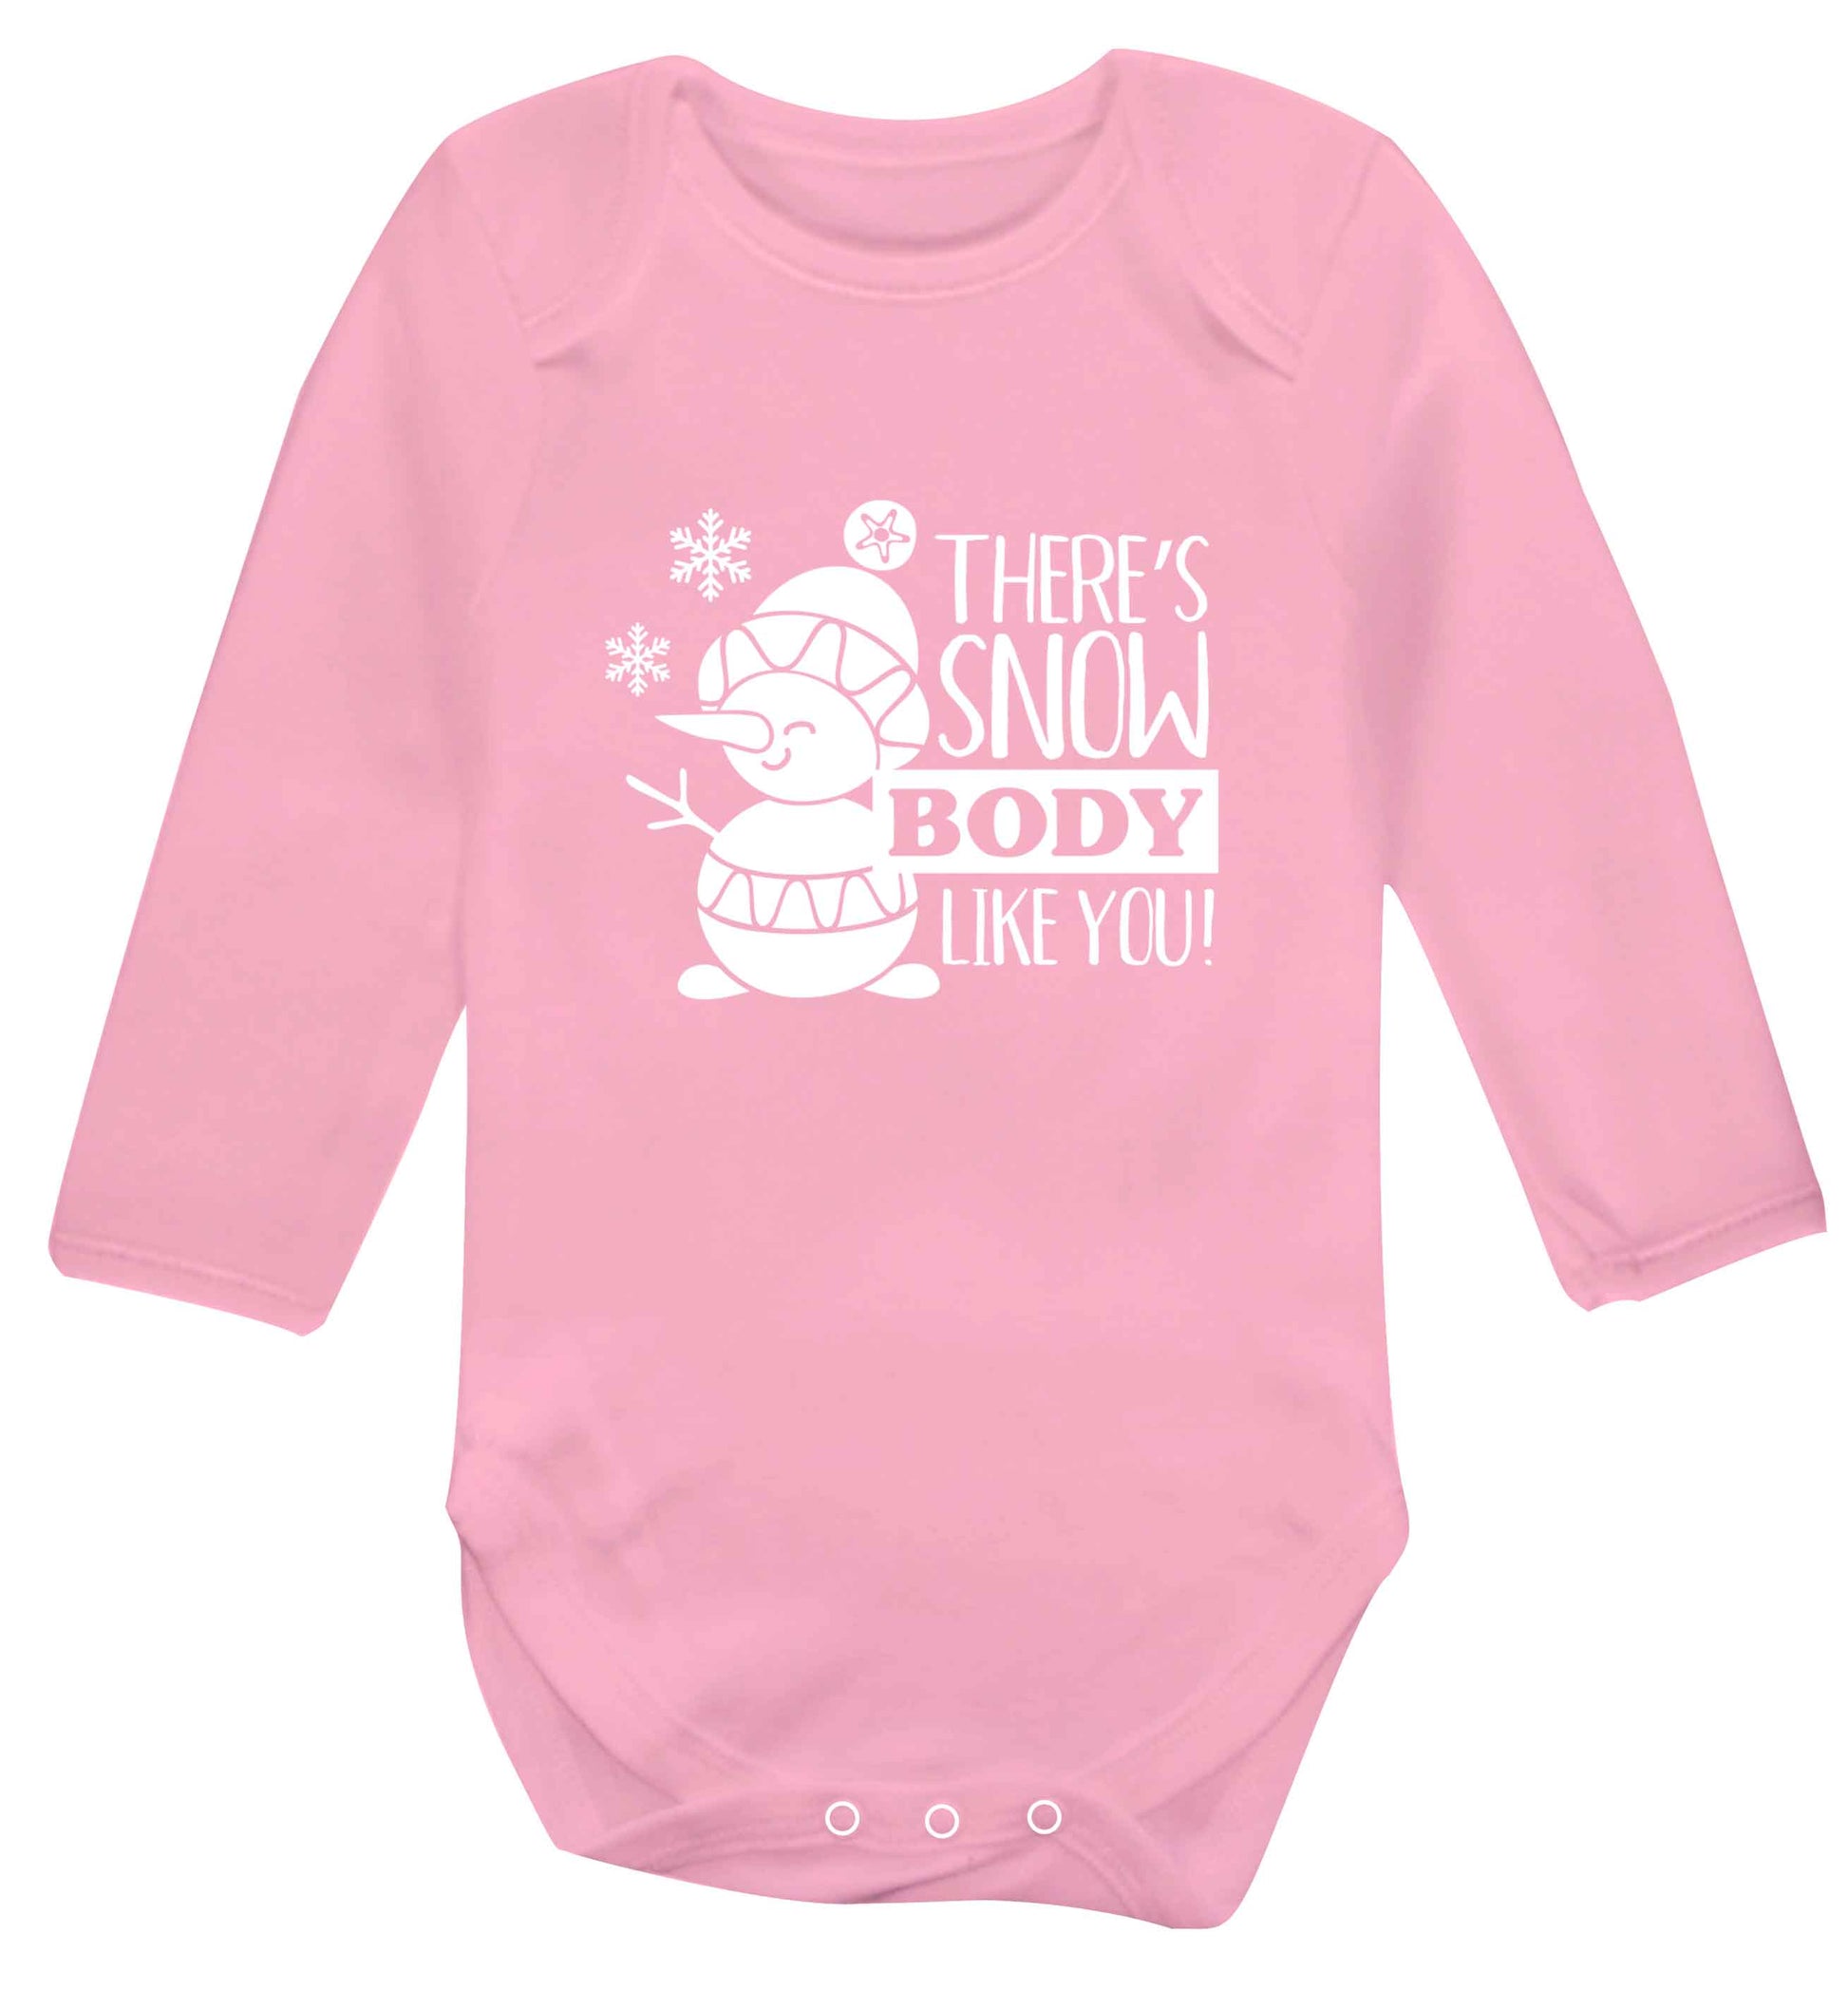 There's snow body like you baby vest long sleeved pale pink 6-12 months